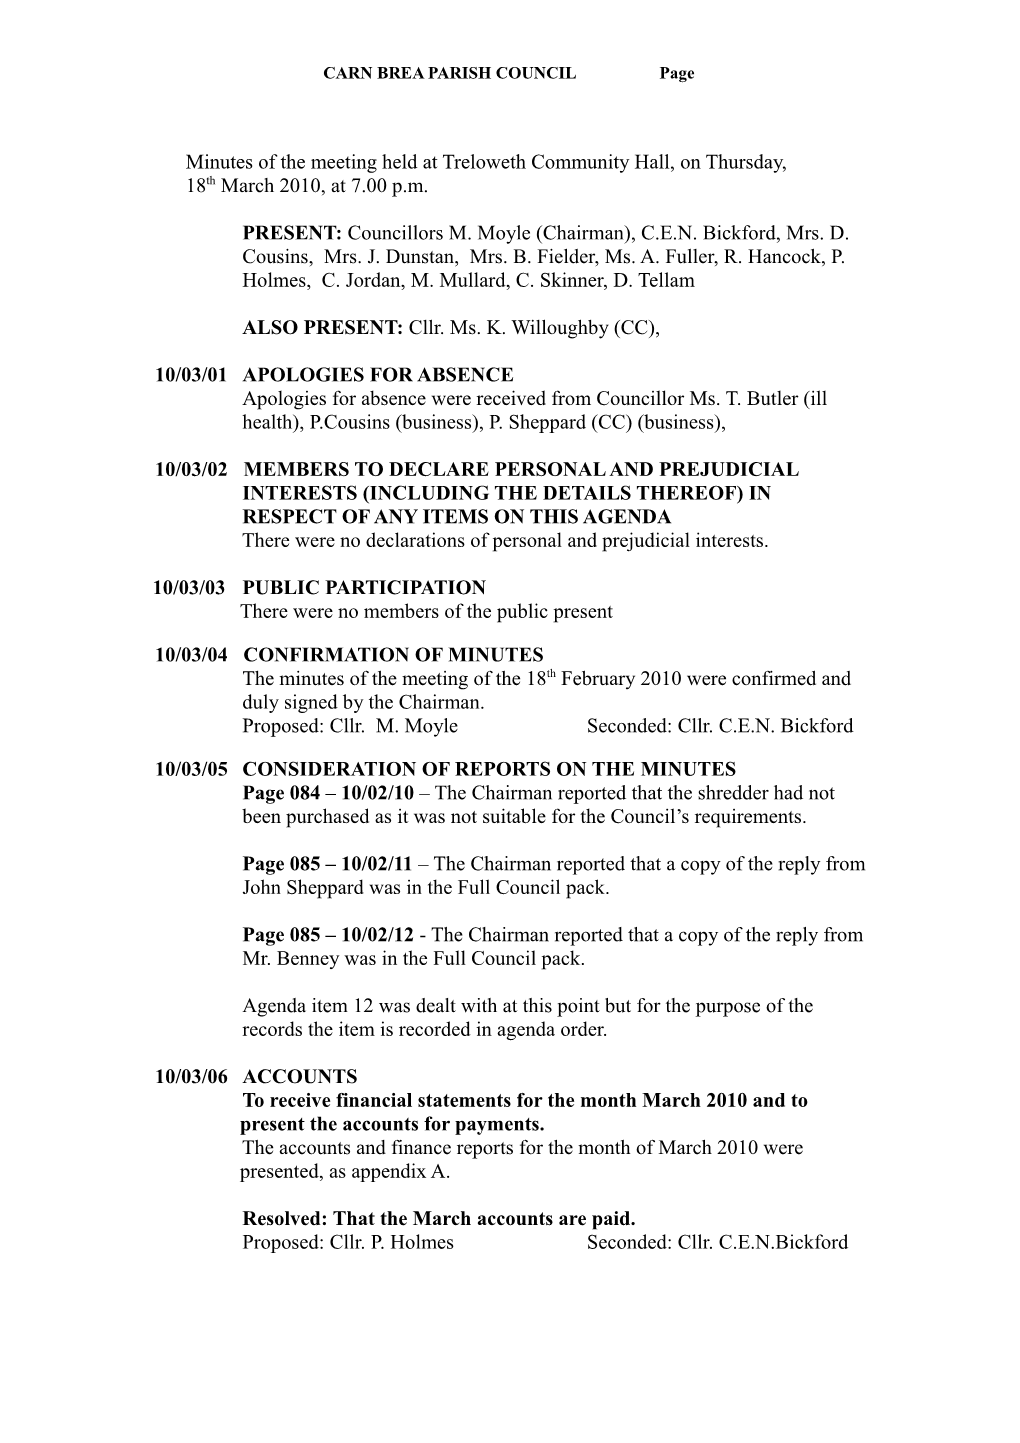 Minutes of the Meeting Held at Treloweth Community Hall, on Thursday, 2003 at 7 s2